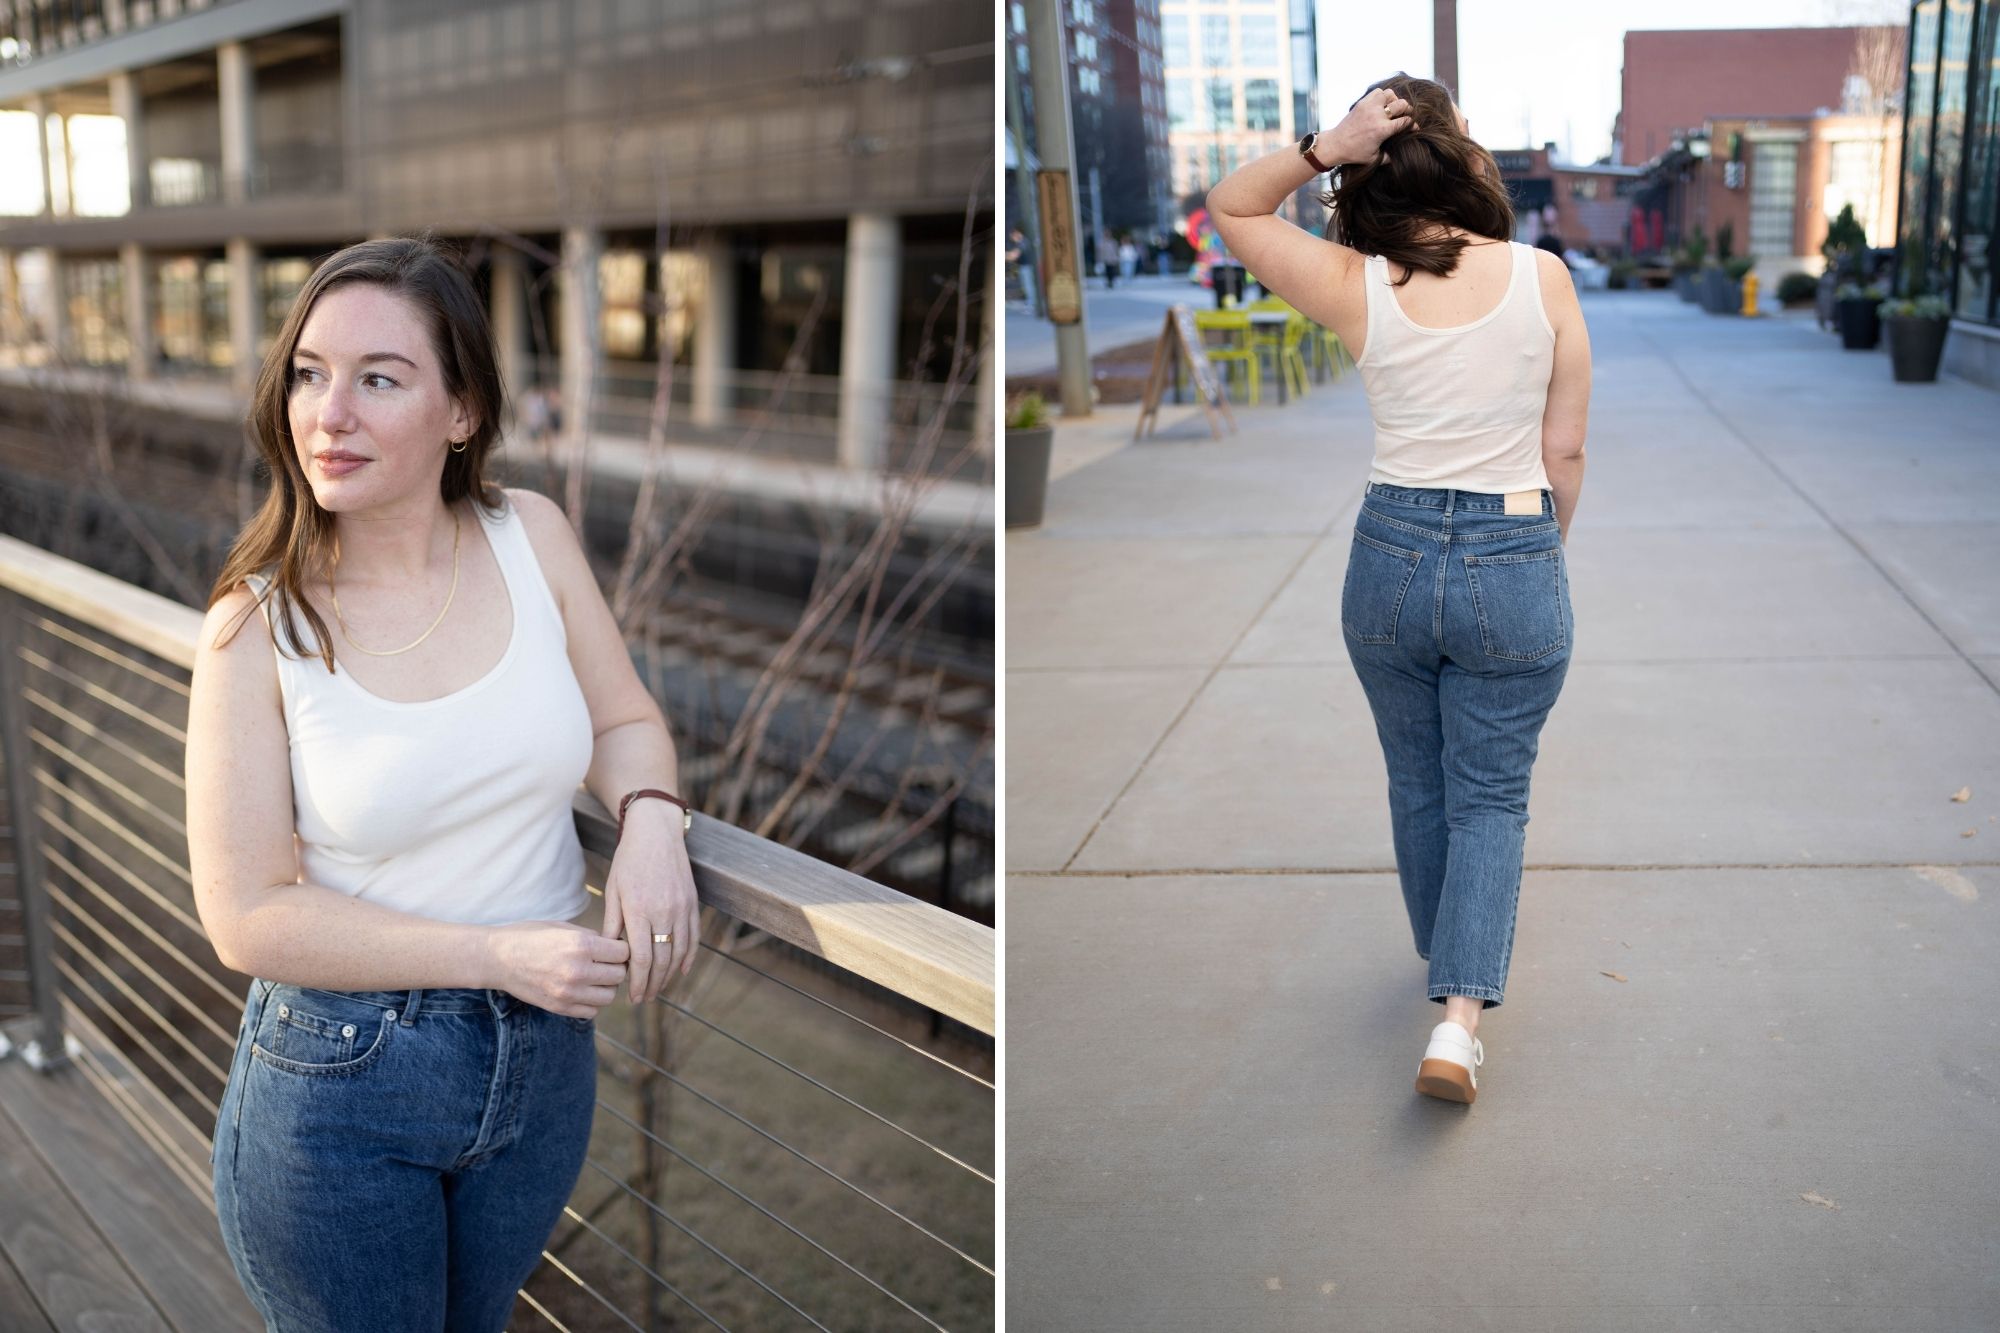 Alyssa wears a cream tank, blue jeans, and white sneakers